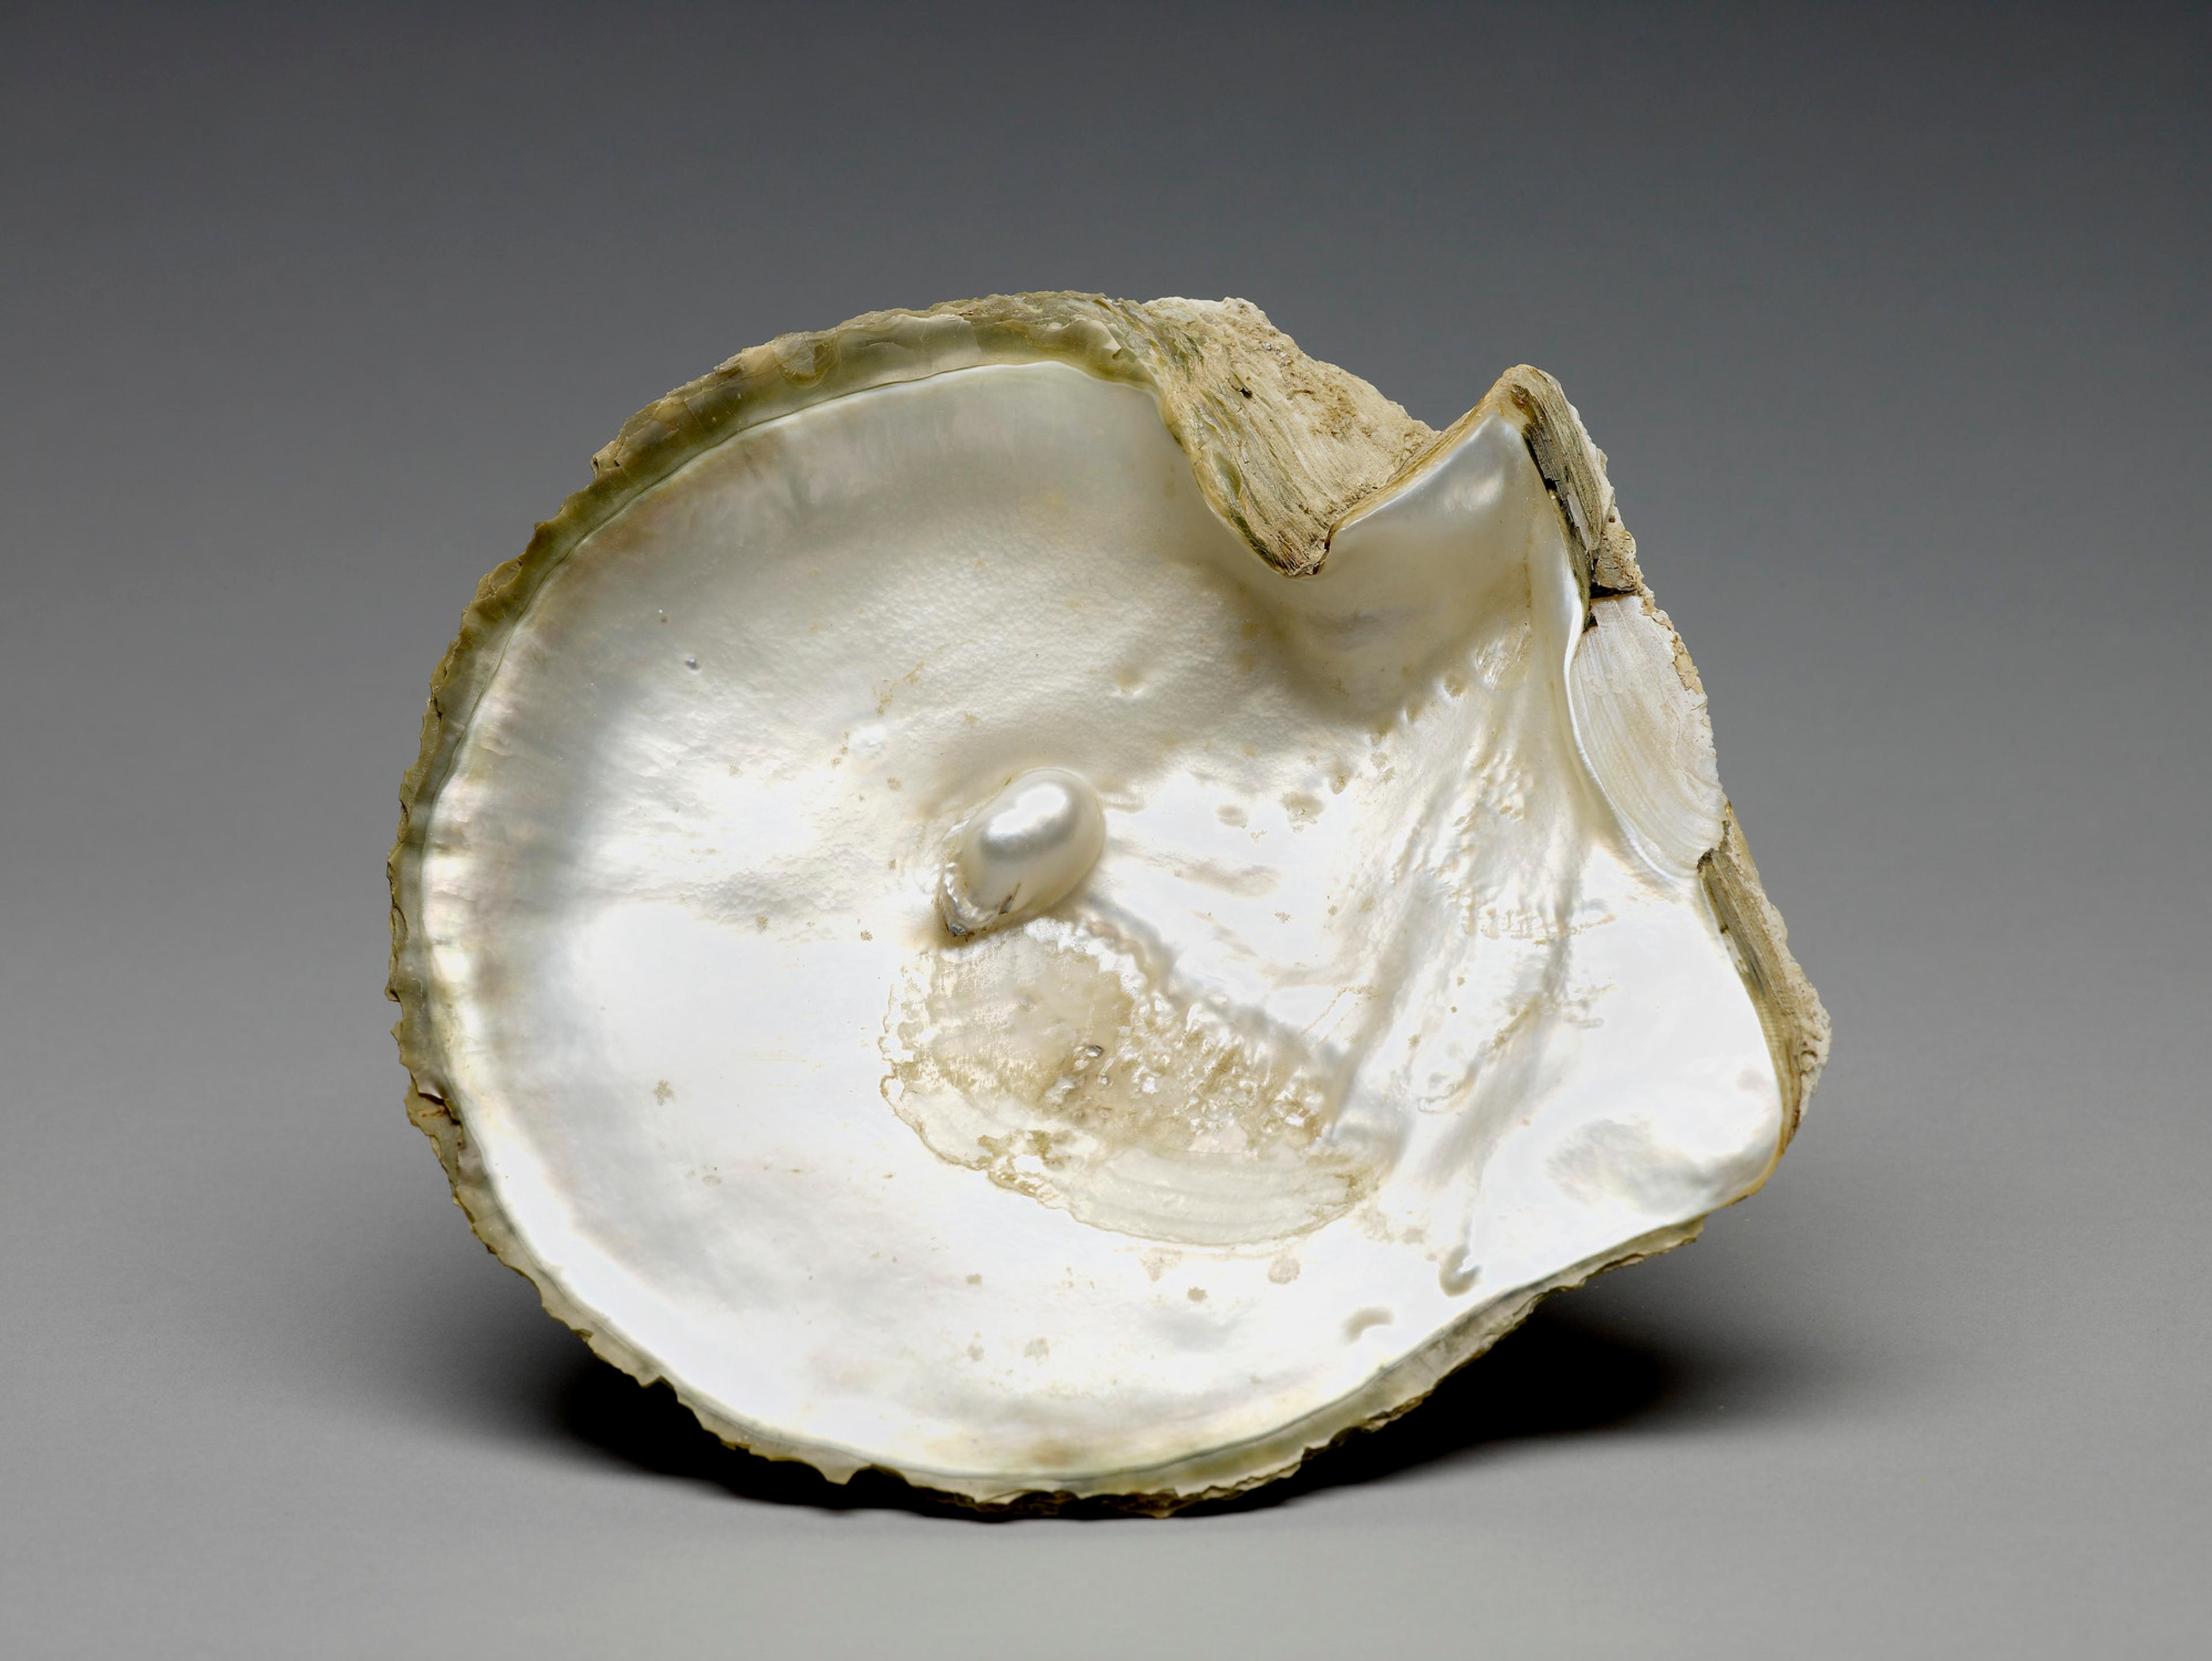 oyster shell with embedded pearl given to Queen Elizabeth II by the National Museum of Doha, Qatar, Arabian Gulf during her State Vsit to Qatar, 21st-24th February 1979 in the Royal Collection